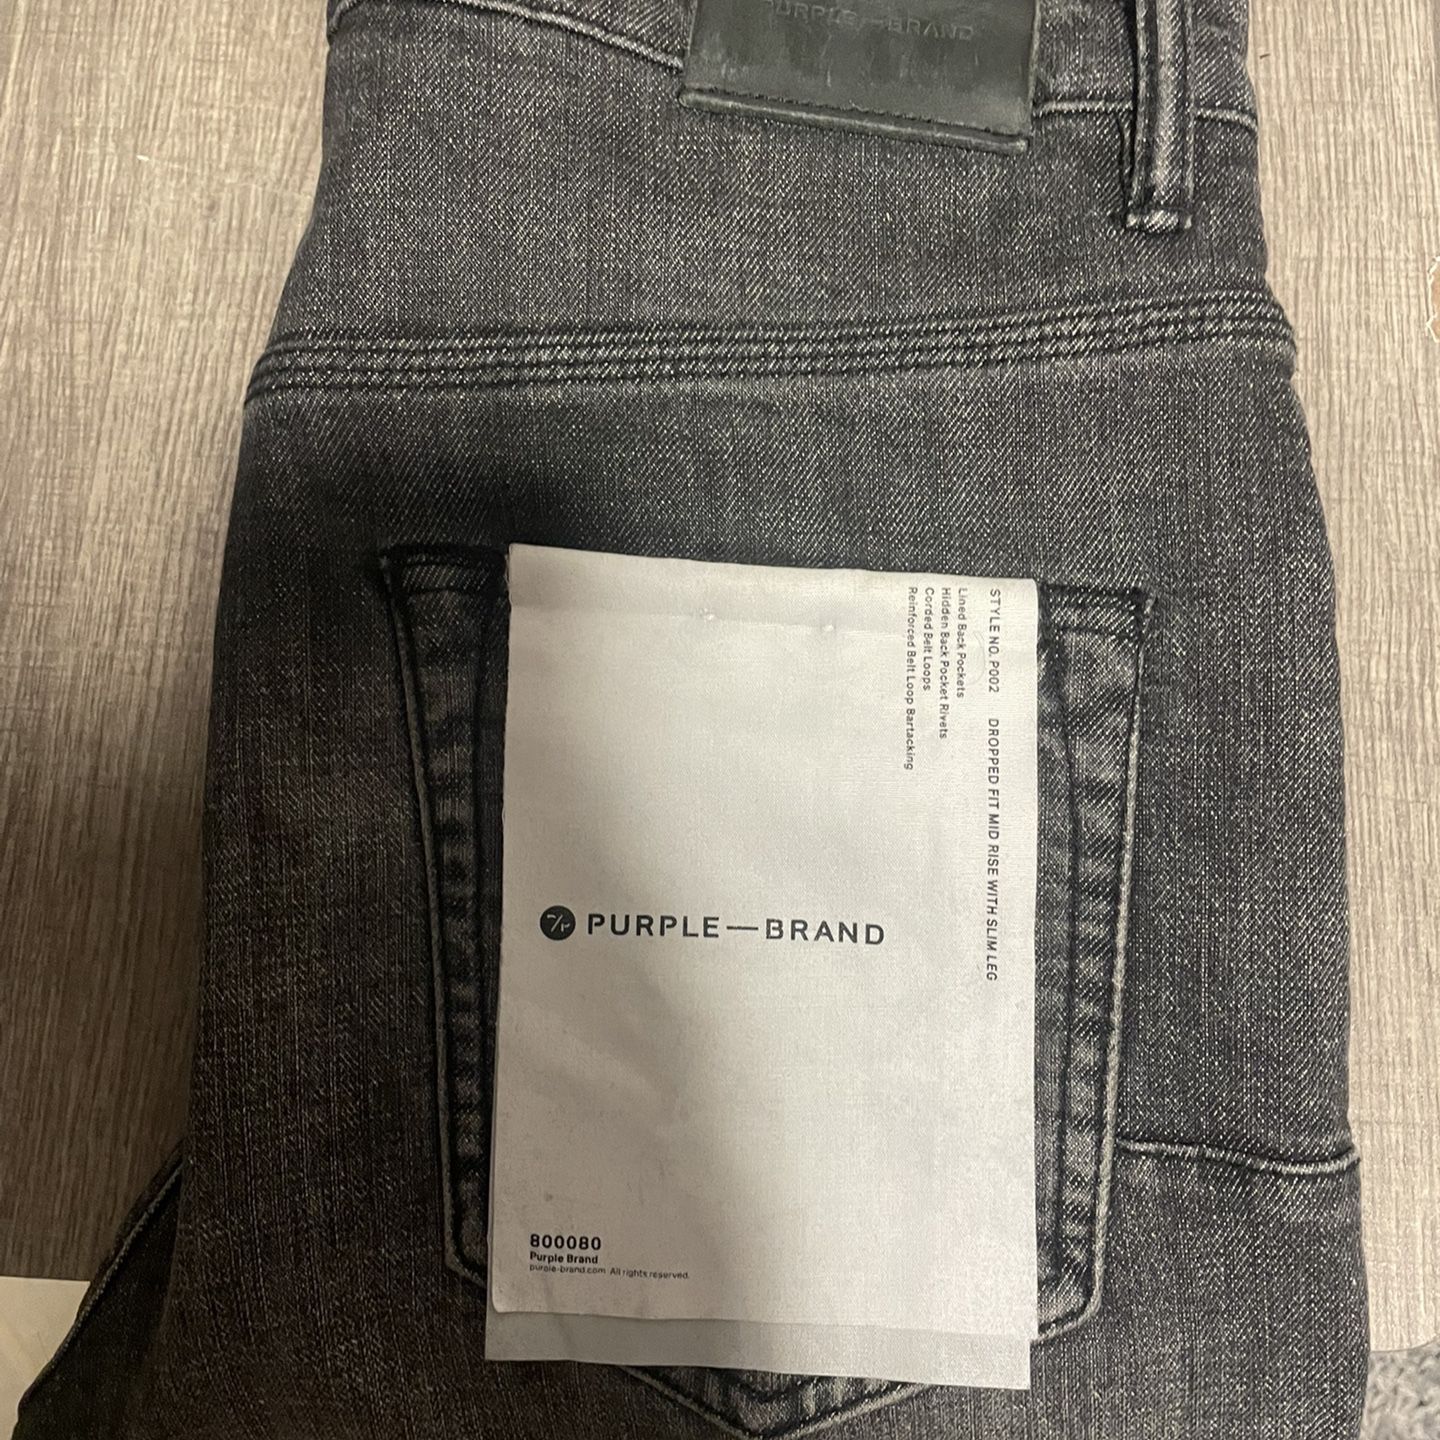 Purple Brand Jeans Style P002 (size 30) for Sale in Salinas, CA - OfferUp